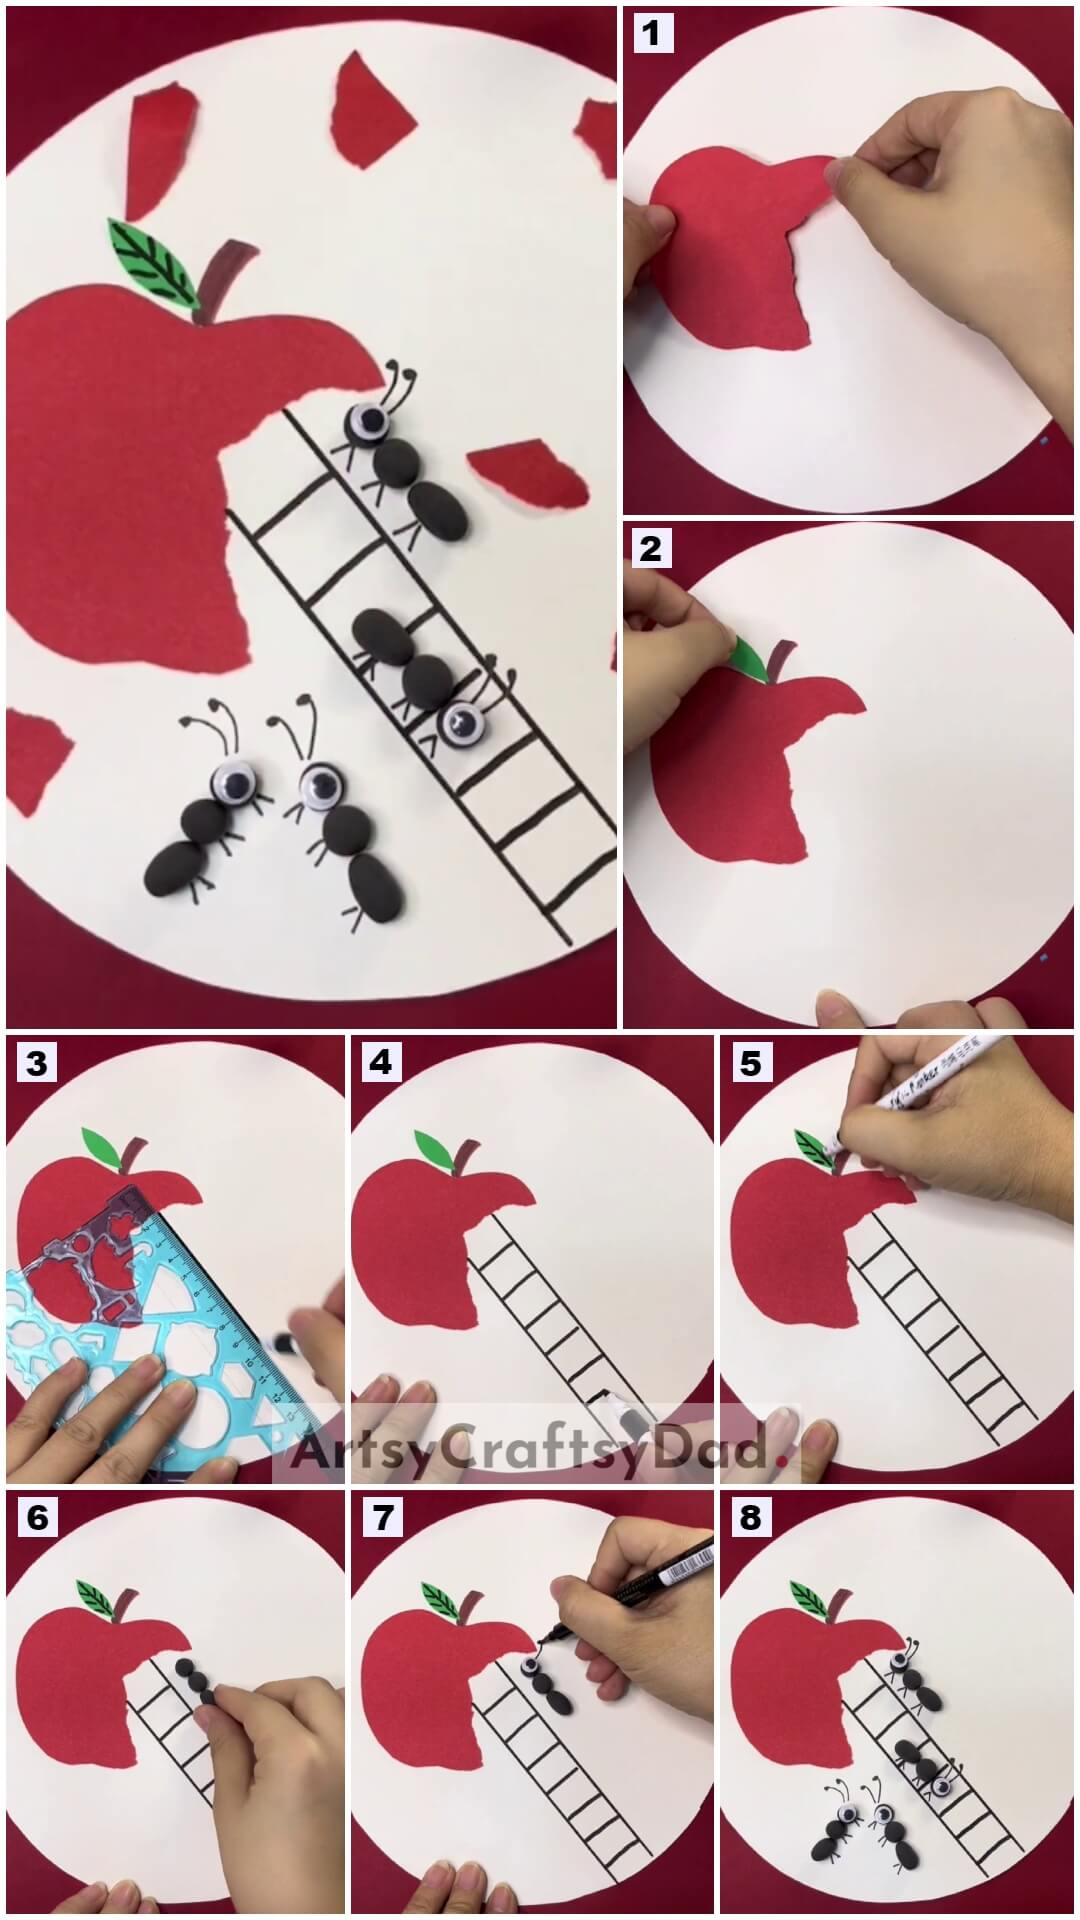 Ant Eating Apple - Creative Craft Tutorial for Kids